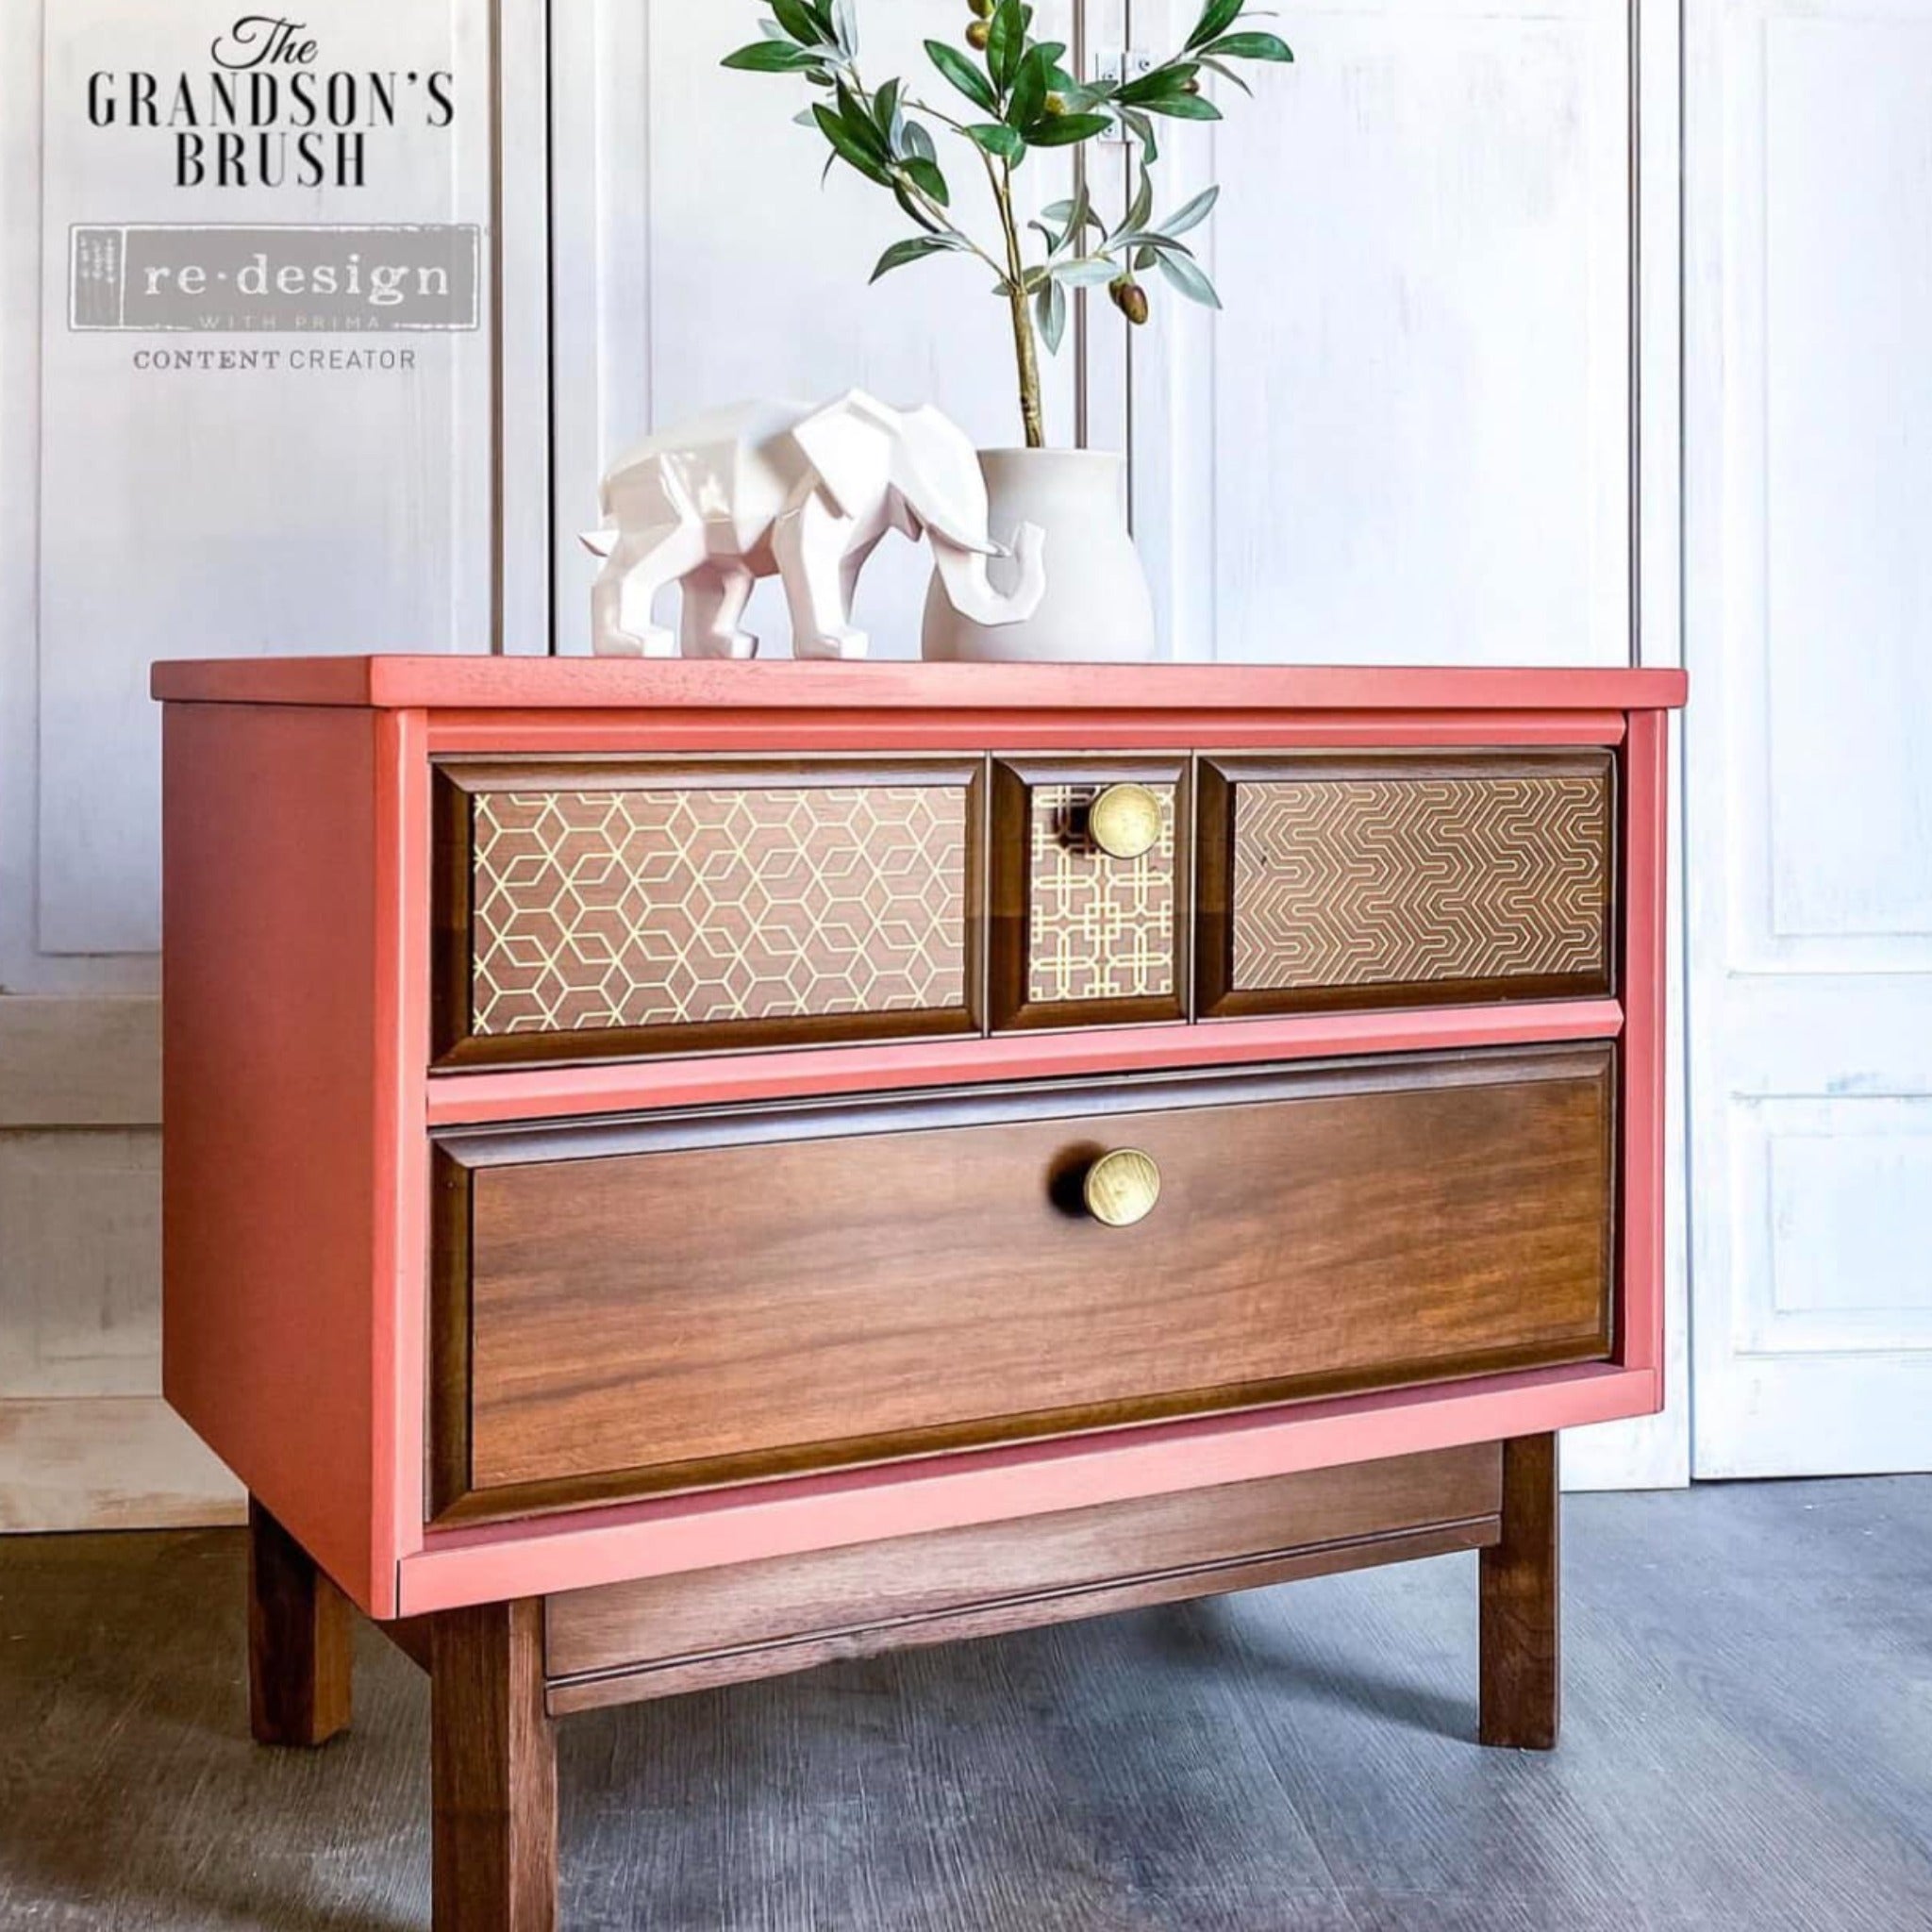 A 2-drawer end table refurbished by The Grandson's Brush is painted coral pink with natural wood drawers and features ReDesign with Prima's Motif Geometrique small transfers on its top drawer inlays.